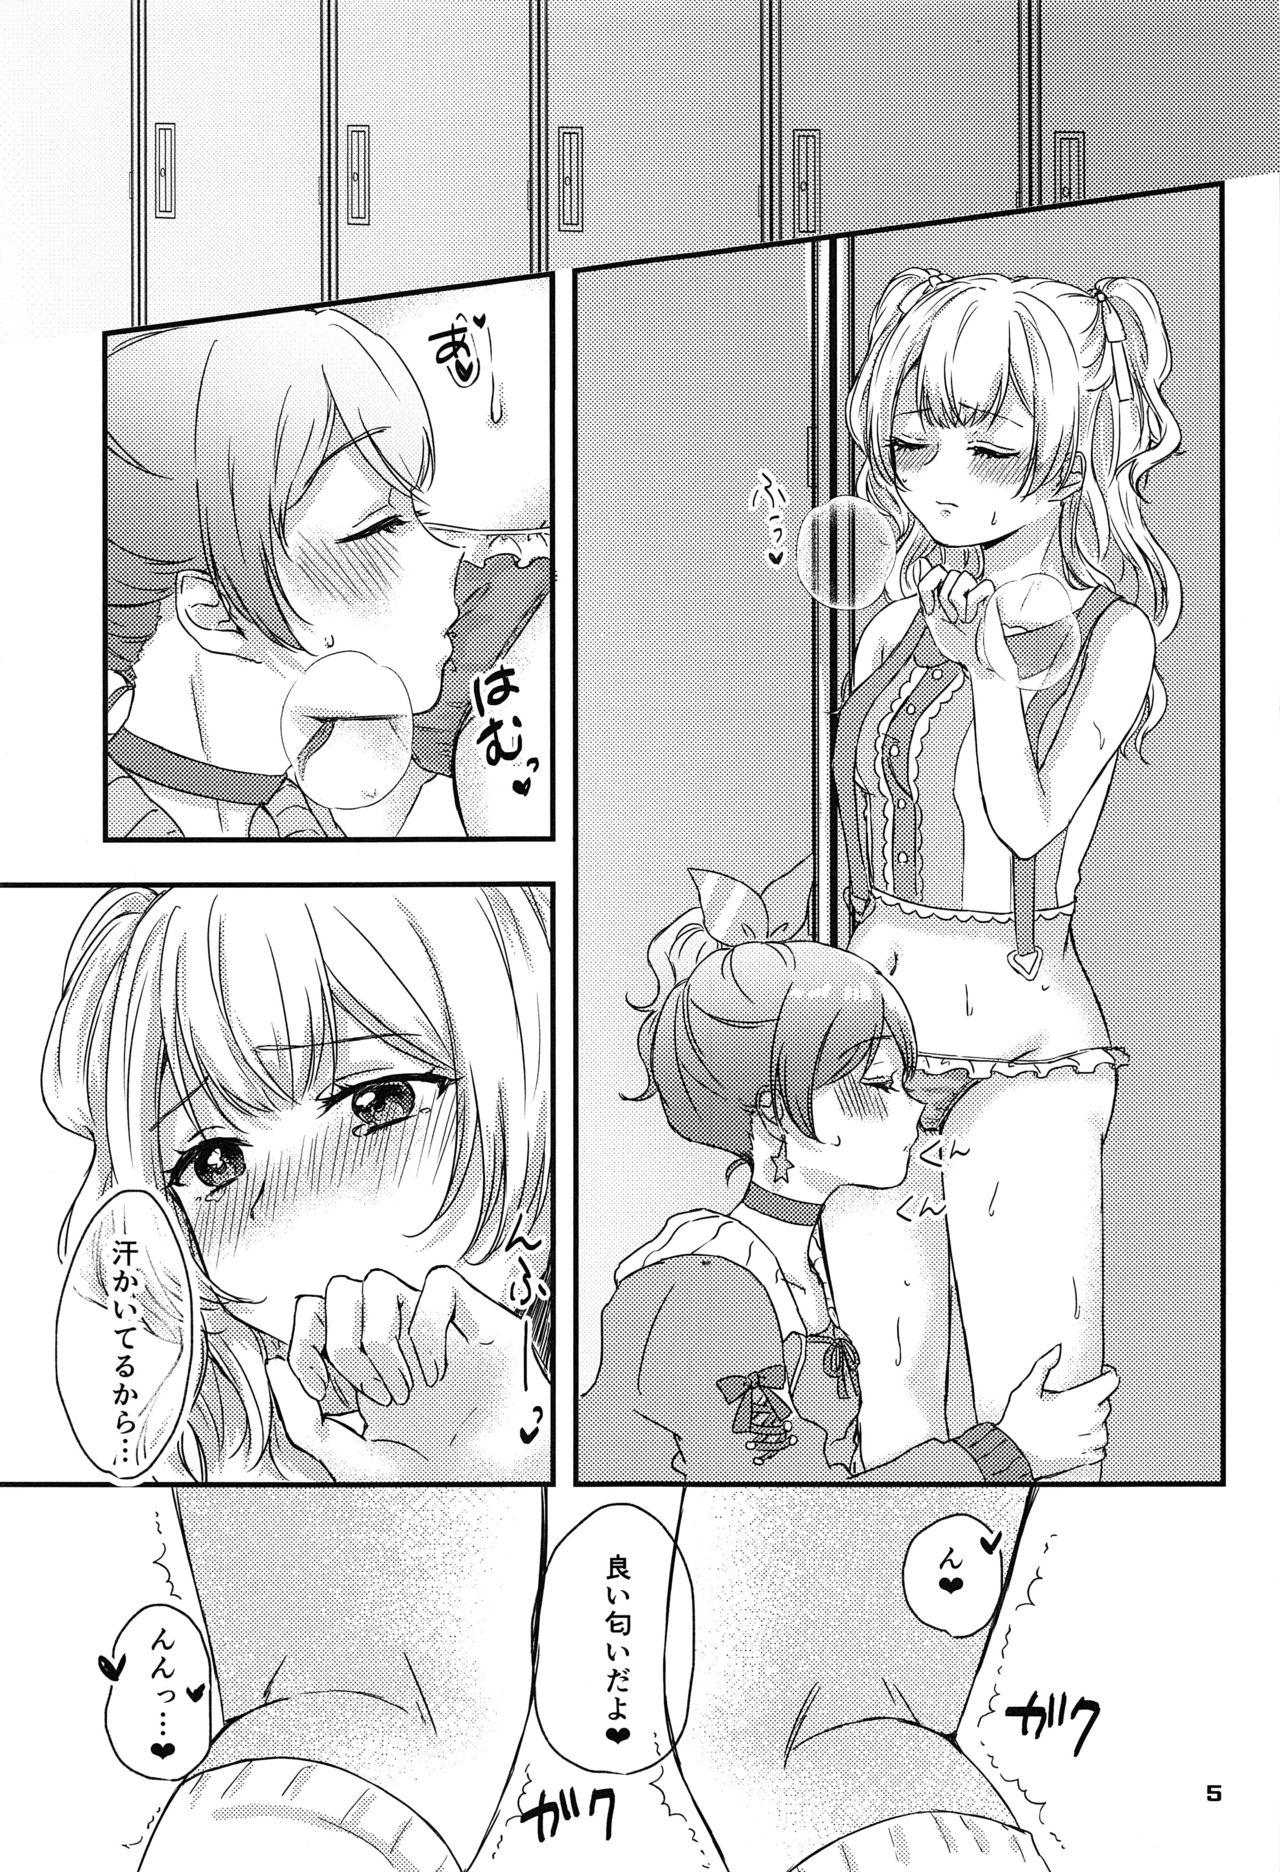 Sucking Dicks Sweet Costume Sex time. - Bang dream Dick Suck - Page 3